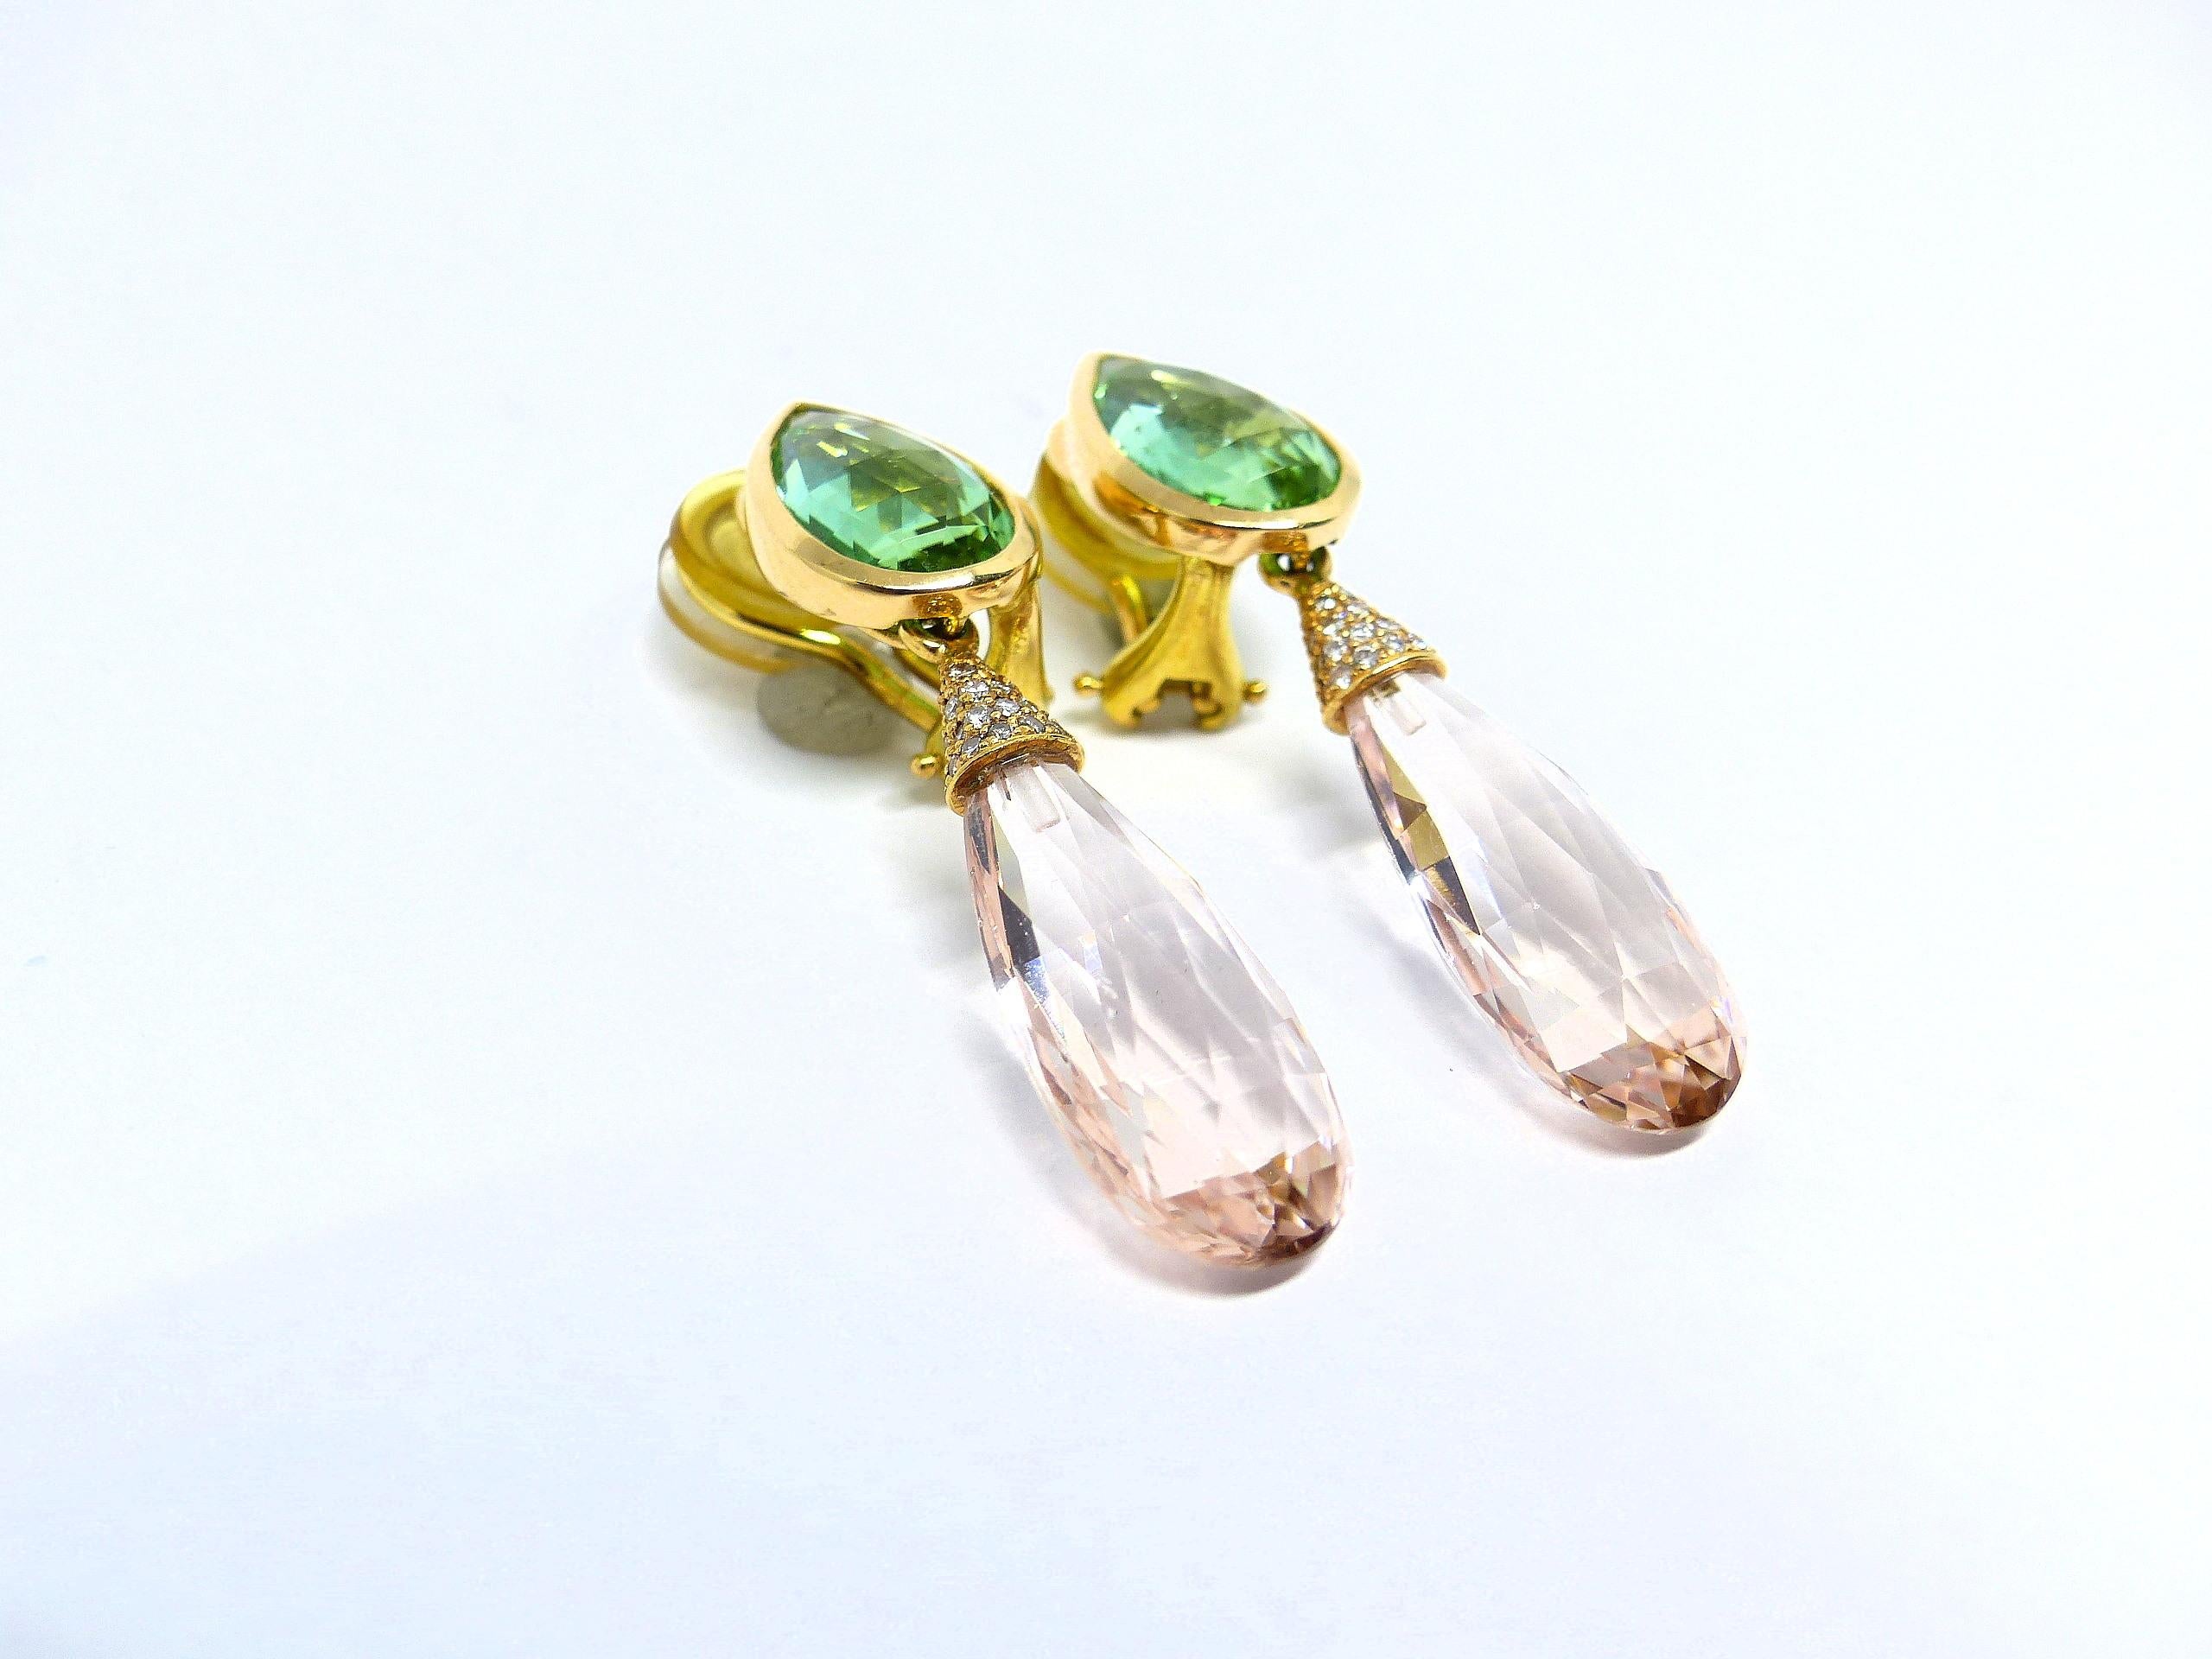 Thomas Leyser is renowned for his contemporary jewellery designs utilizing fine gemstones.

These 18k Rose Gold (12.30g) pair of earrings are set with 2x fine Morganites (briolette cut, 24x9.5x6.5mm, 16.29ct) + 2x fine Tourmalines (pear-shape,